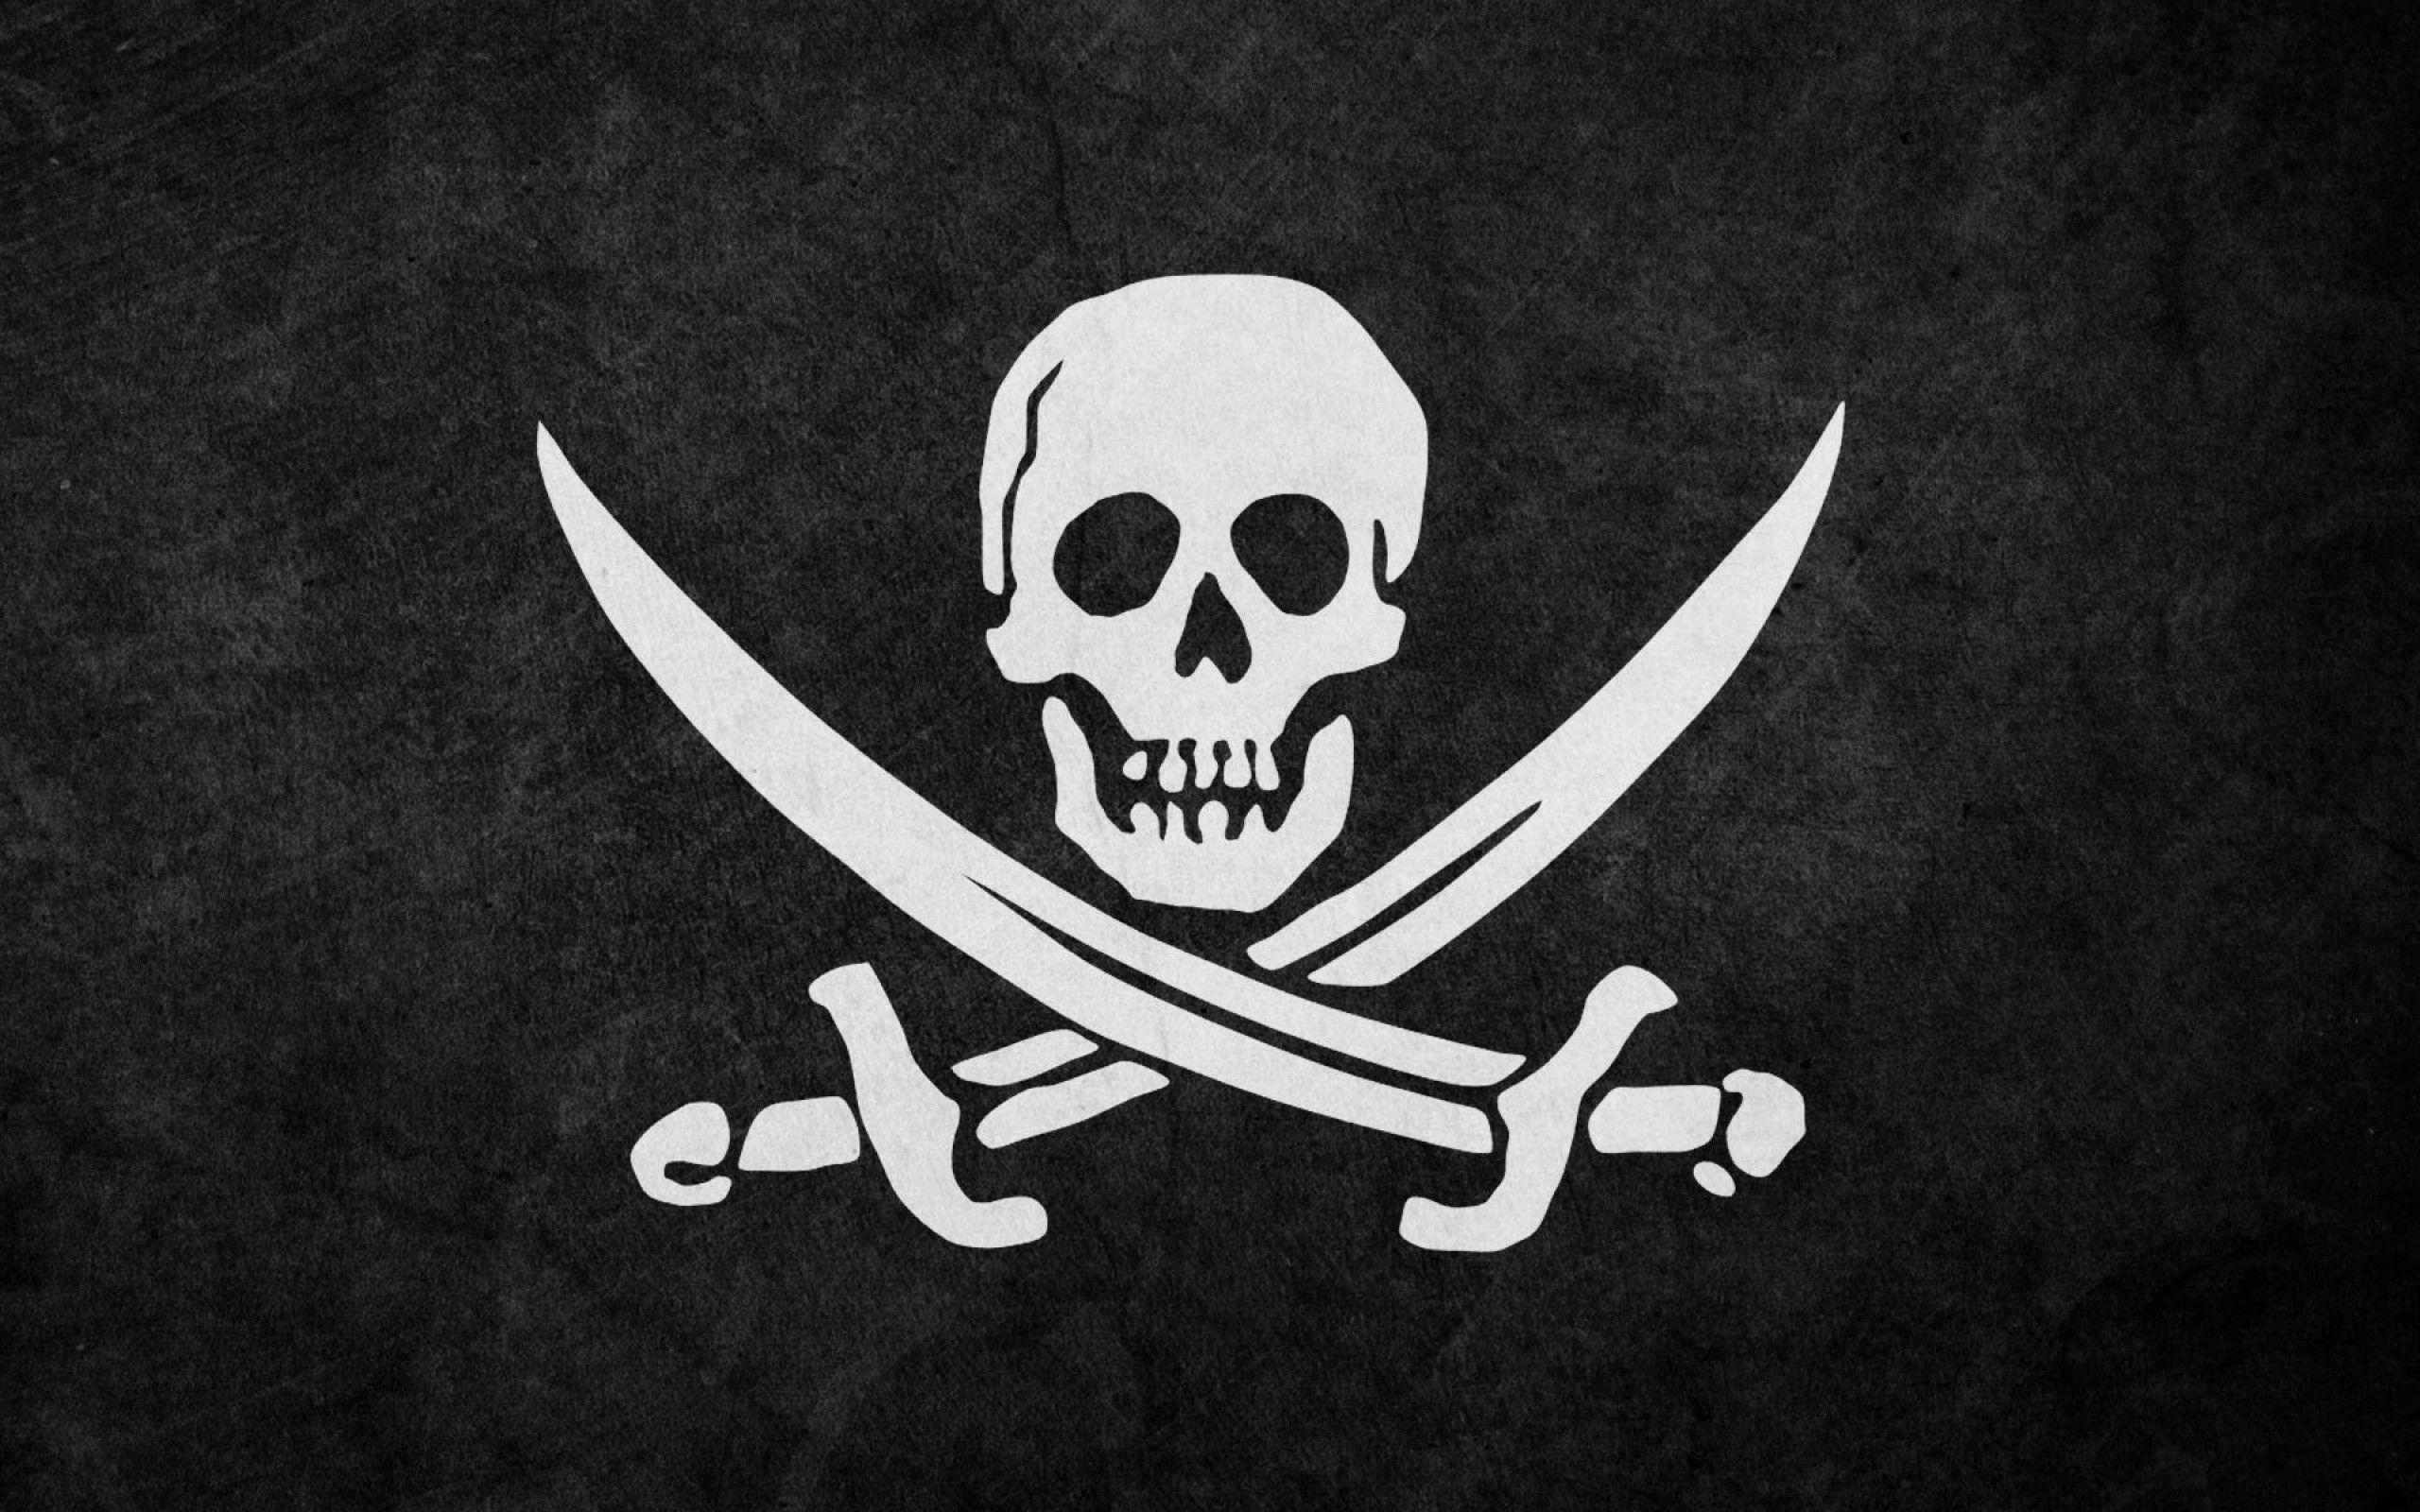 Jolly Roger HD Wallpaper. Background. Image